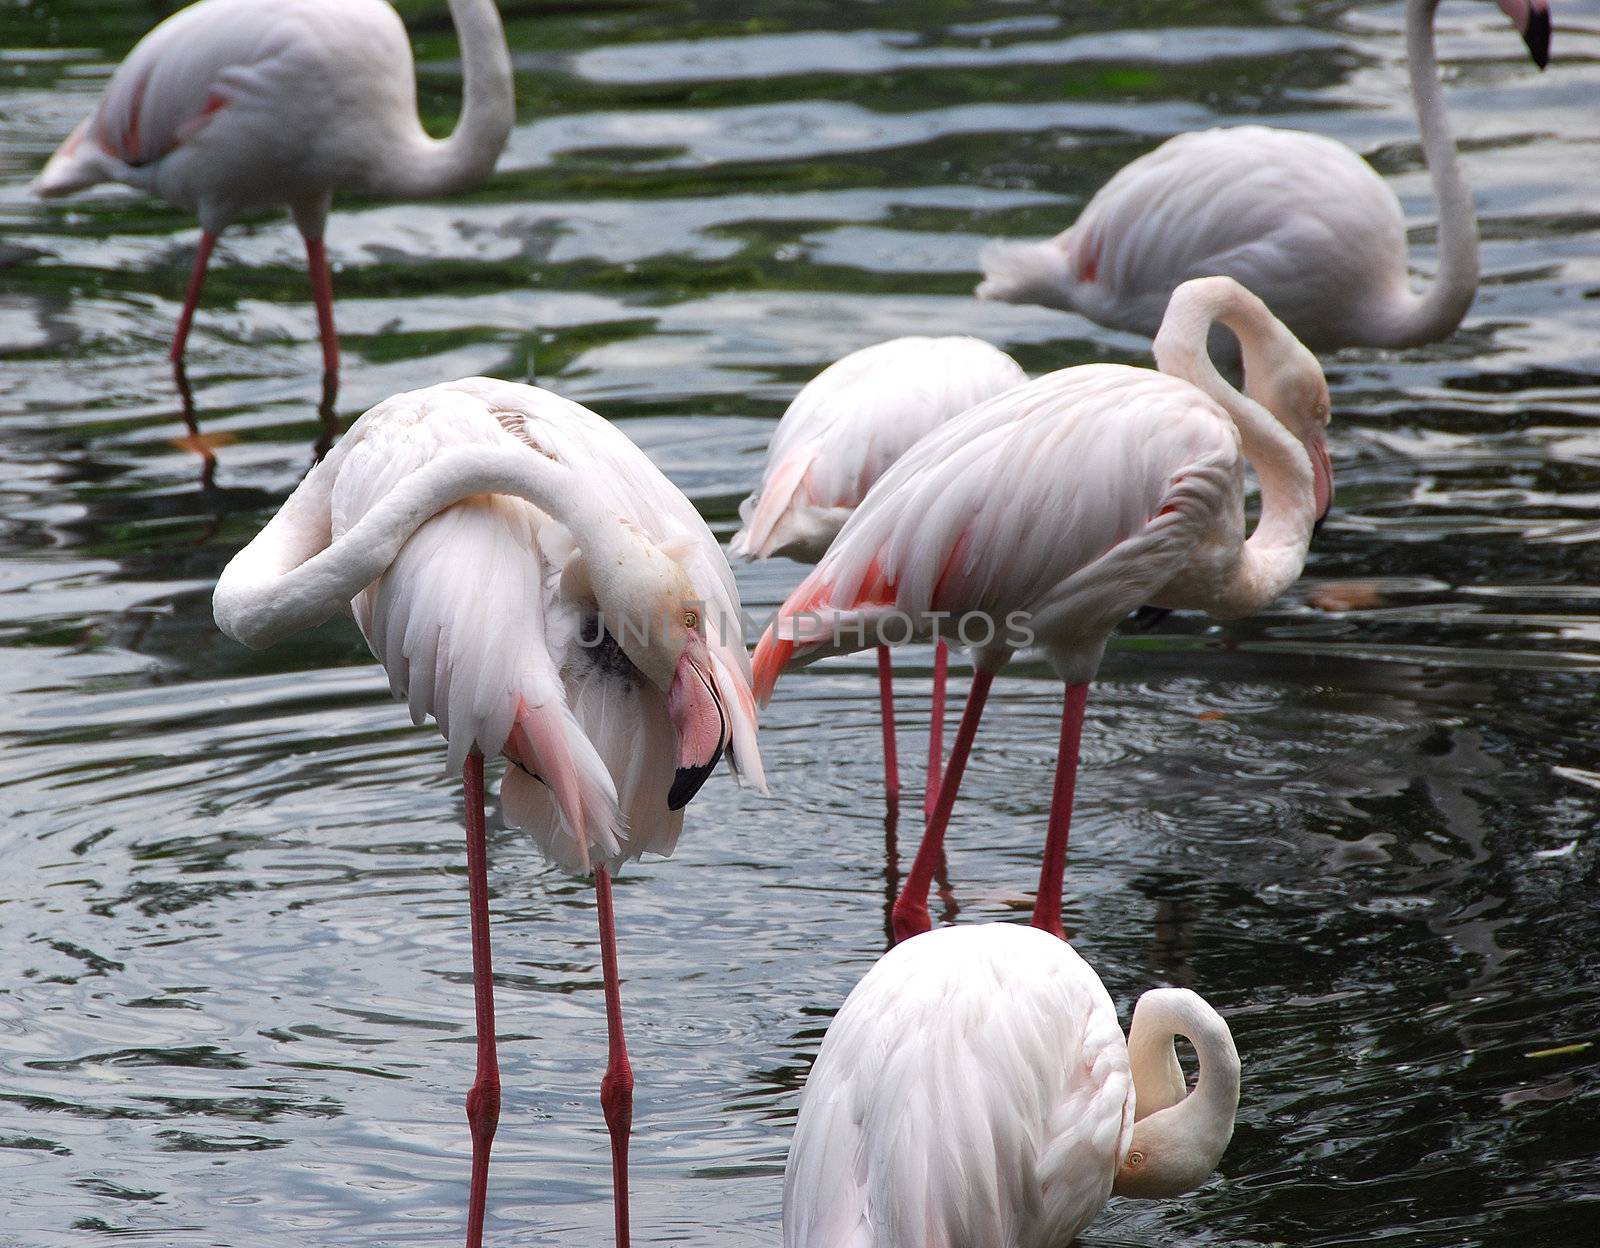 Flamingos in a pond at a zoo